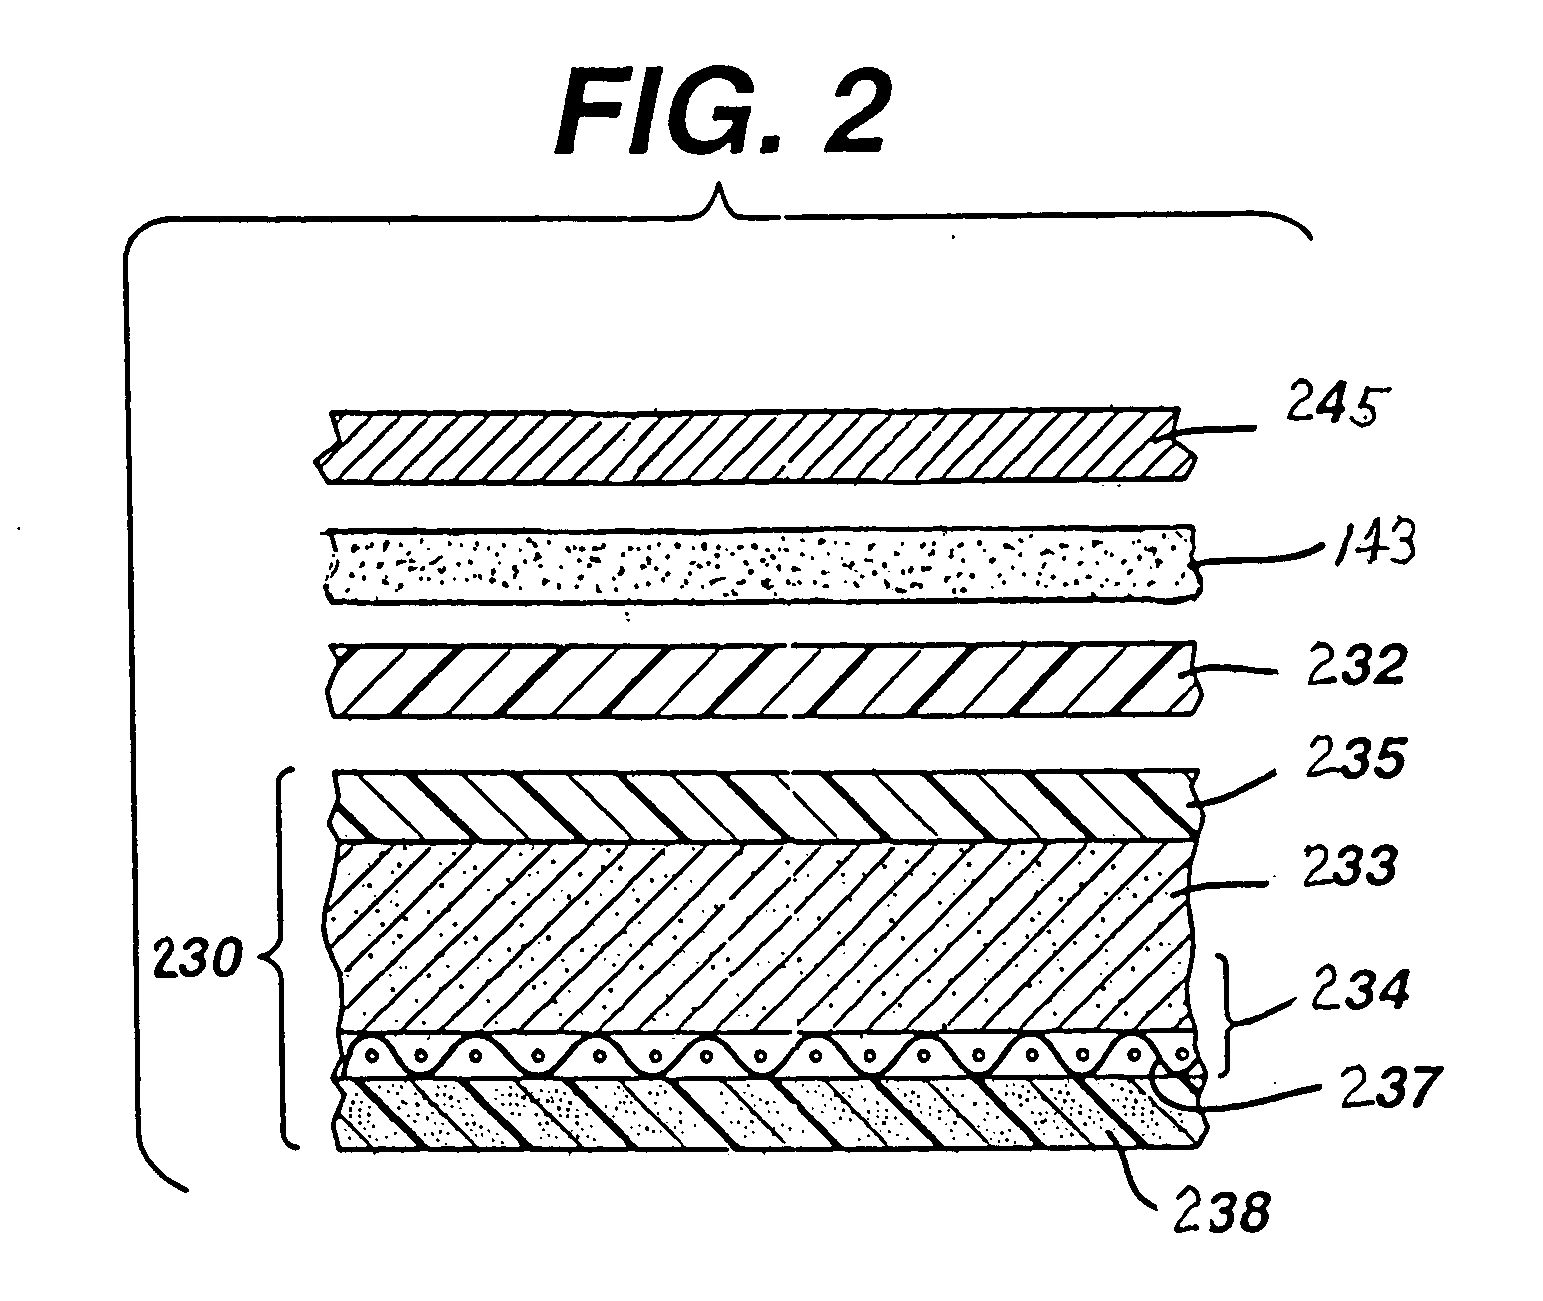 Zinc/air cell with improved anode